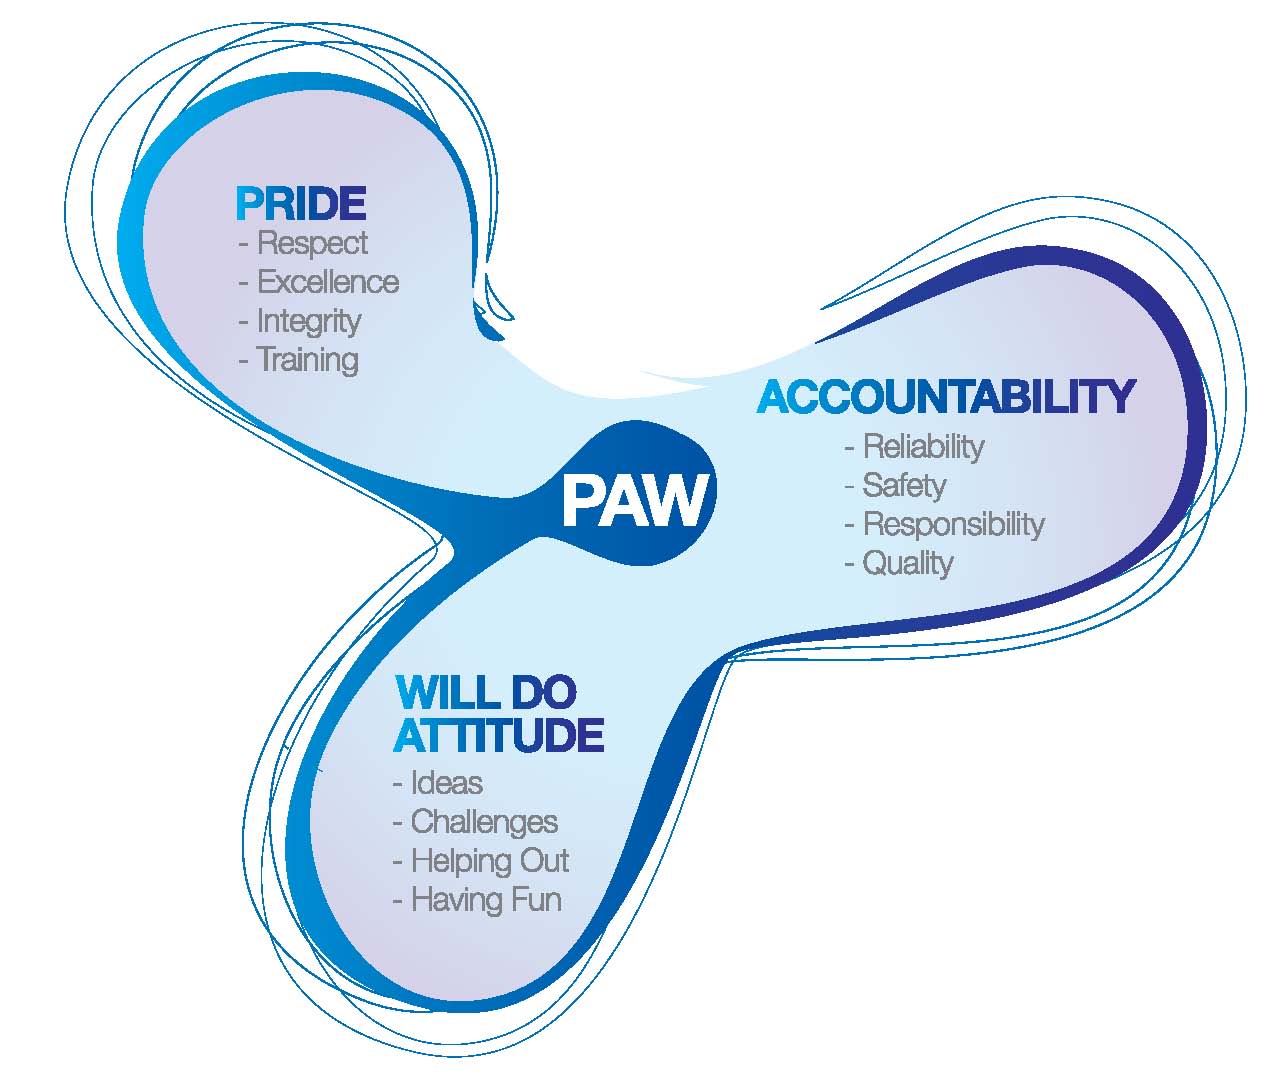 Our Galvin PAW Values | Pride, Accountability and Will do Attitude